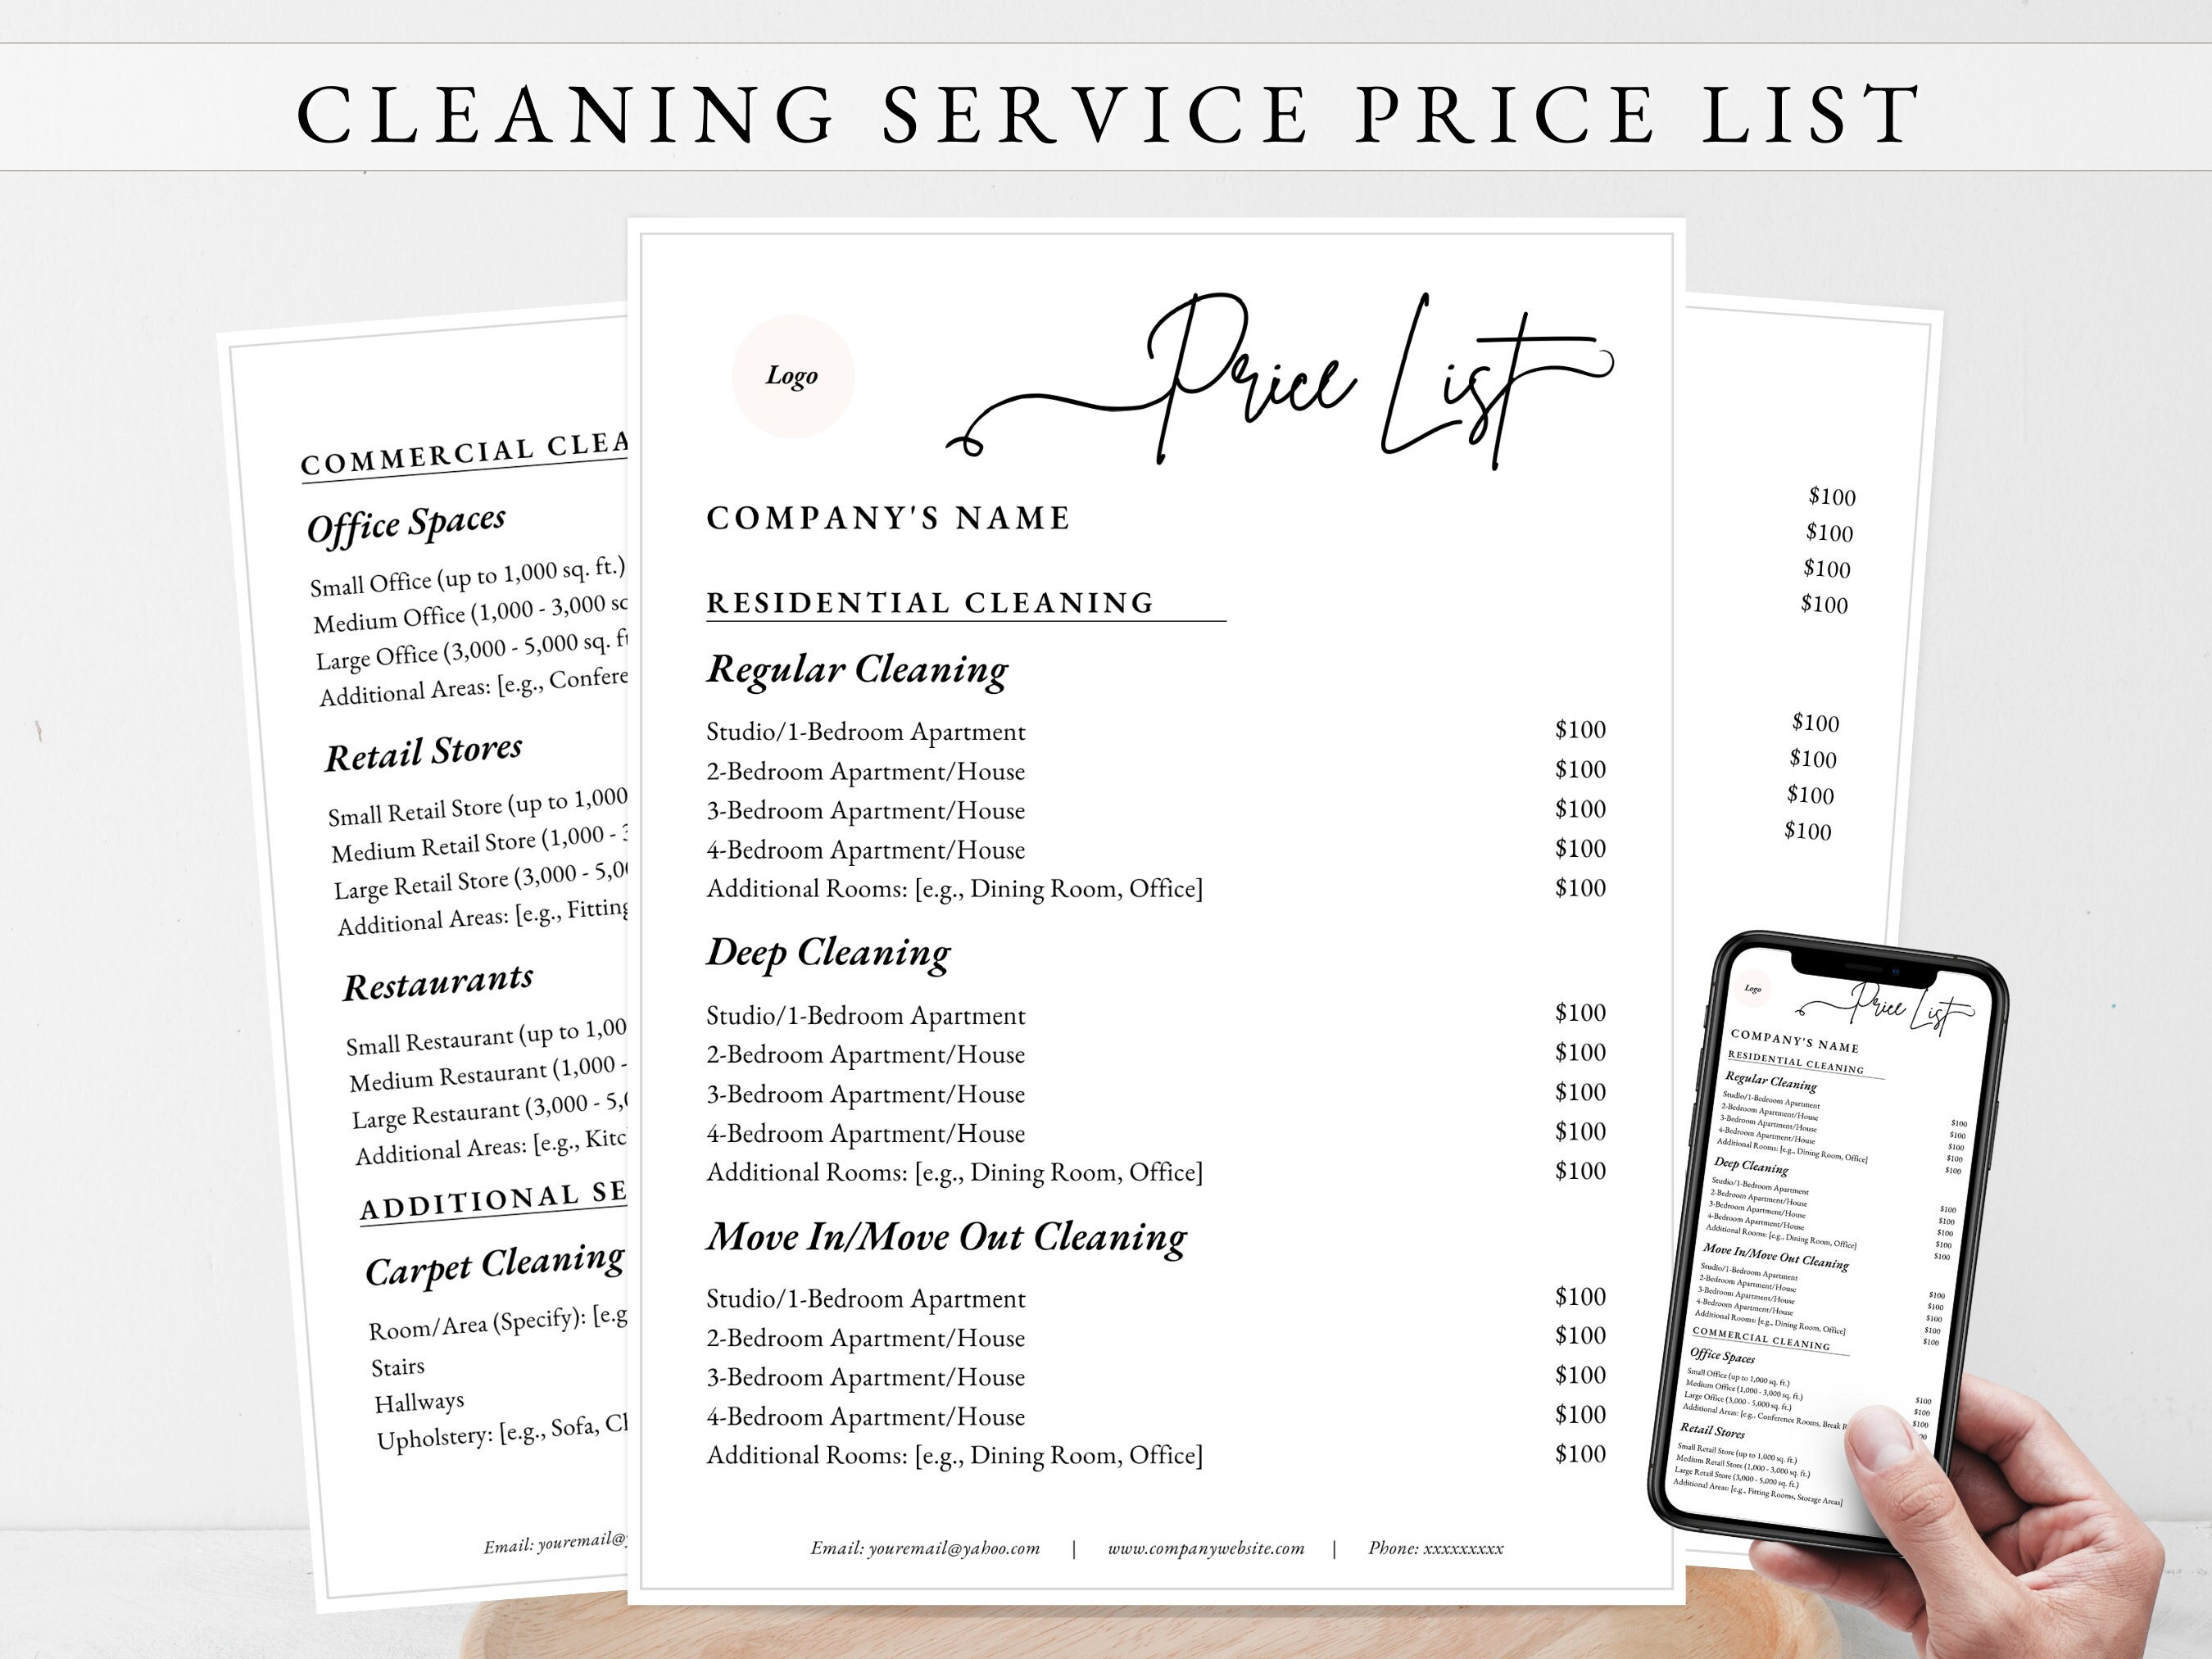 CLEANING SERVICE PRICE List Cleaning Business Price List 